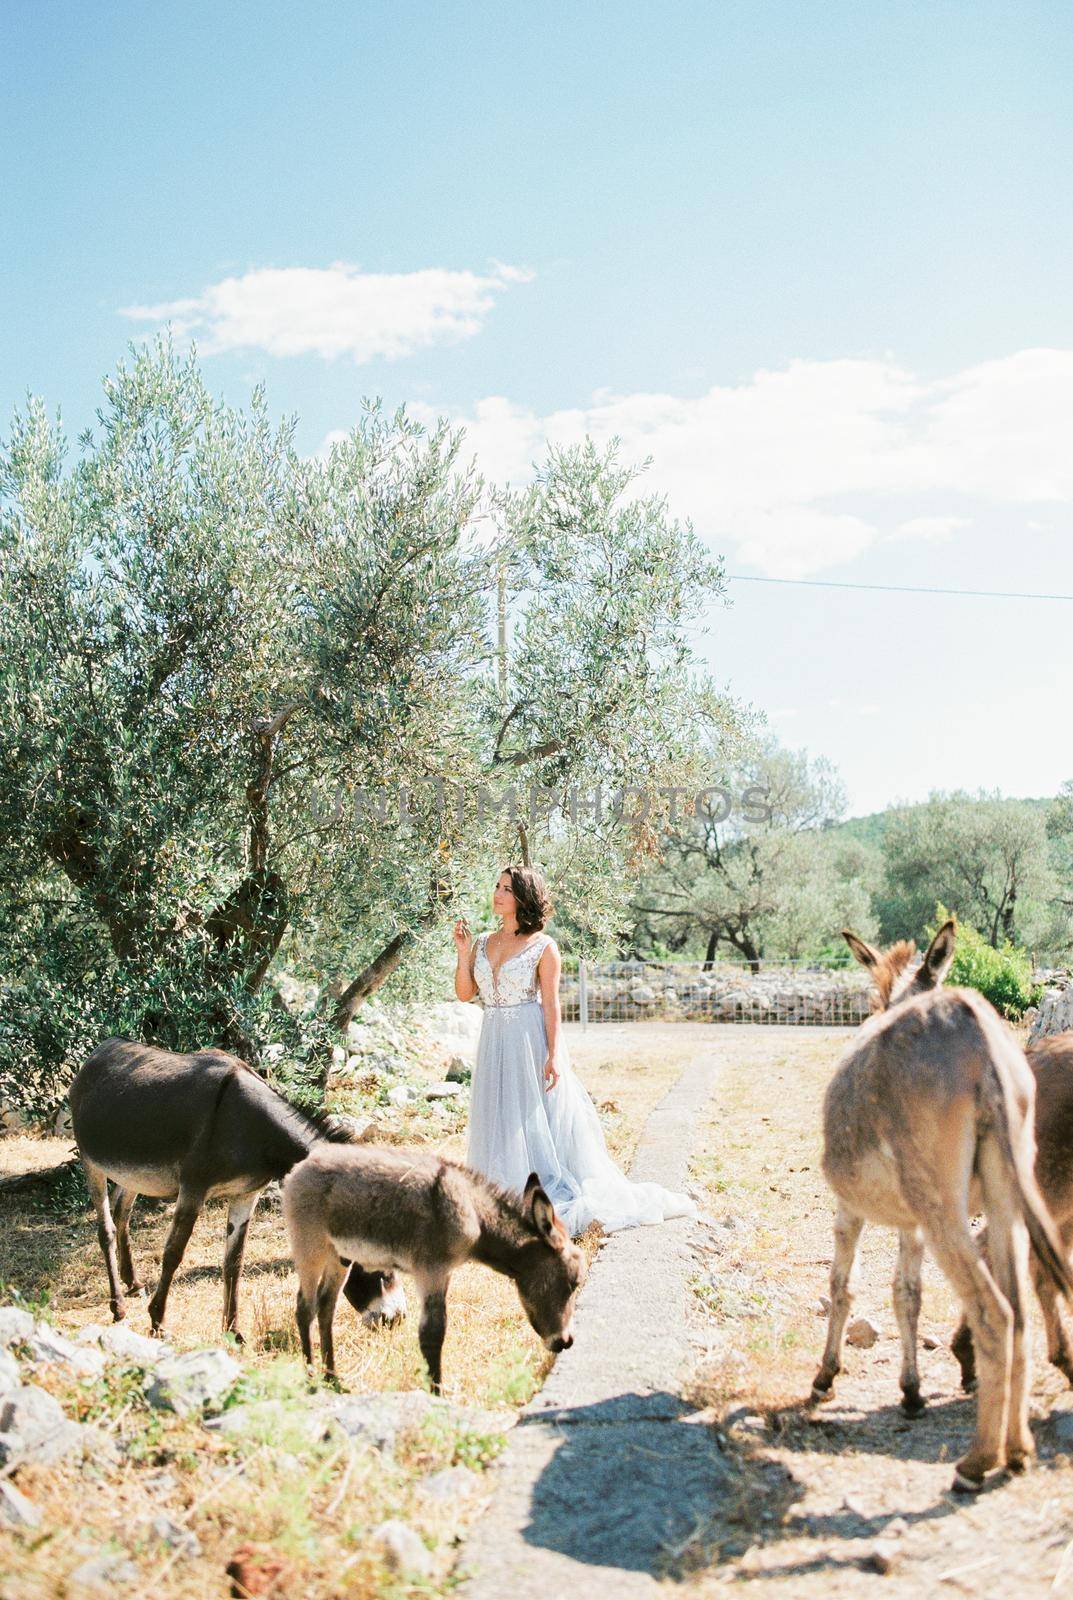 Bride stand under an olive tree near grazing donkeys by Nadtochiy